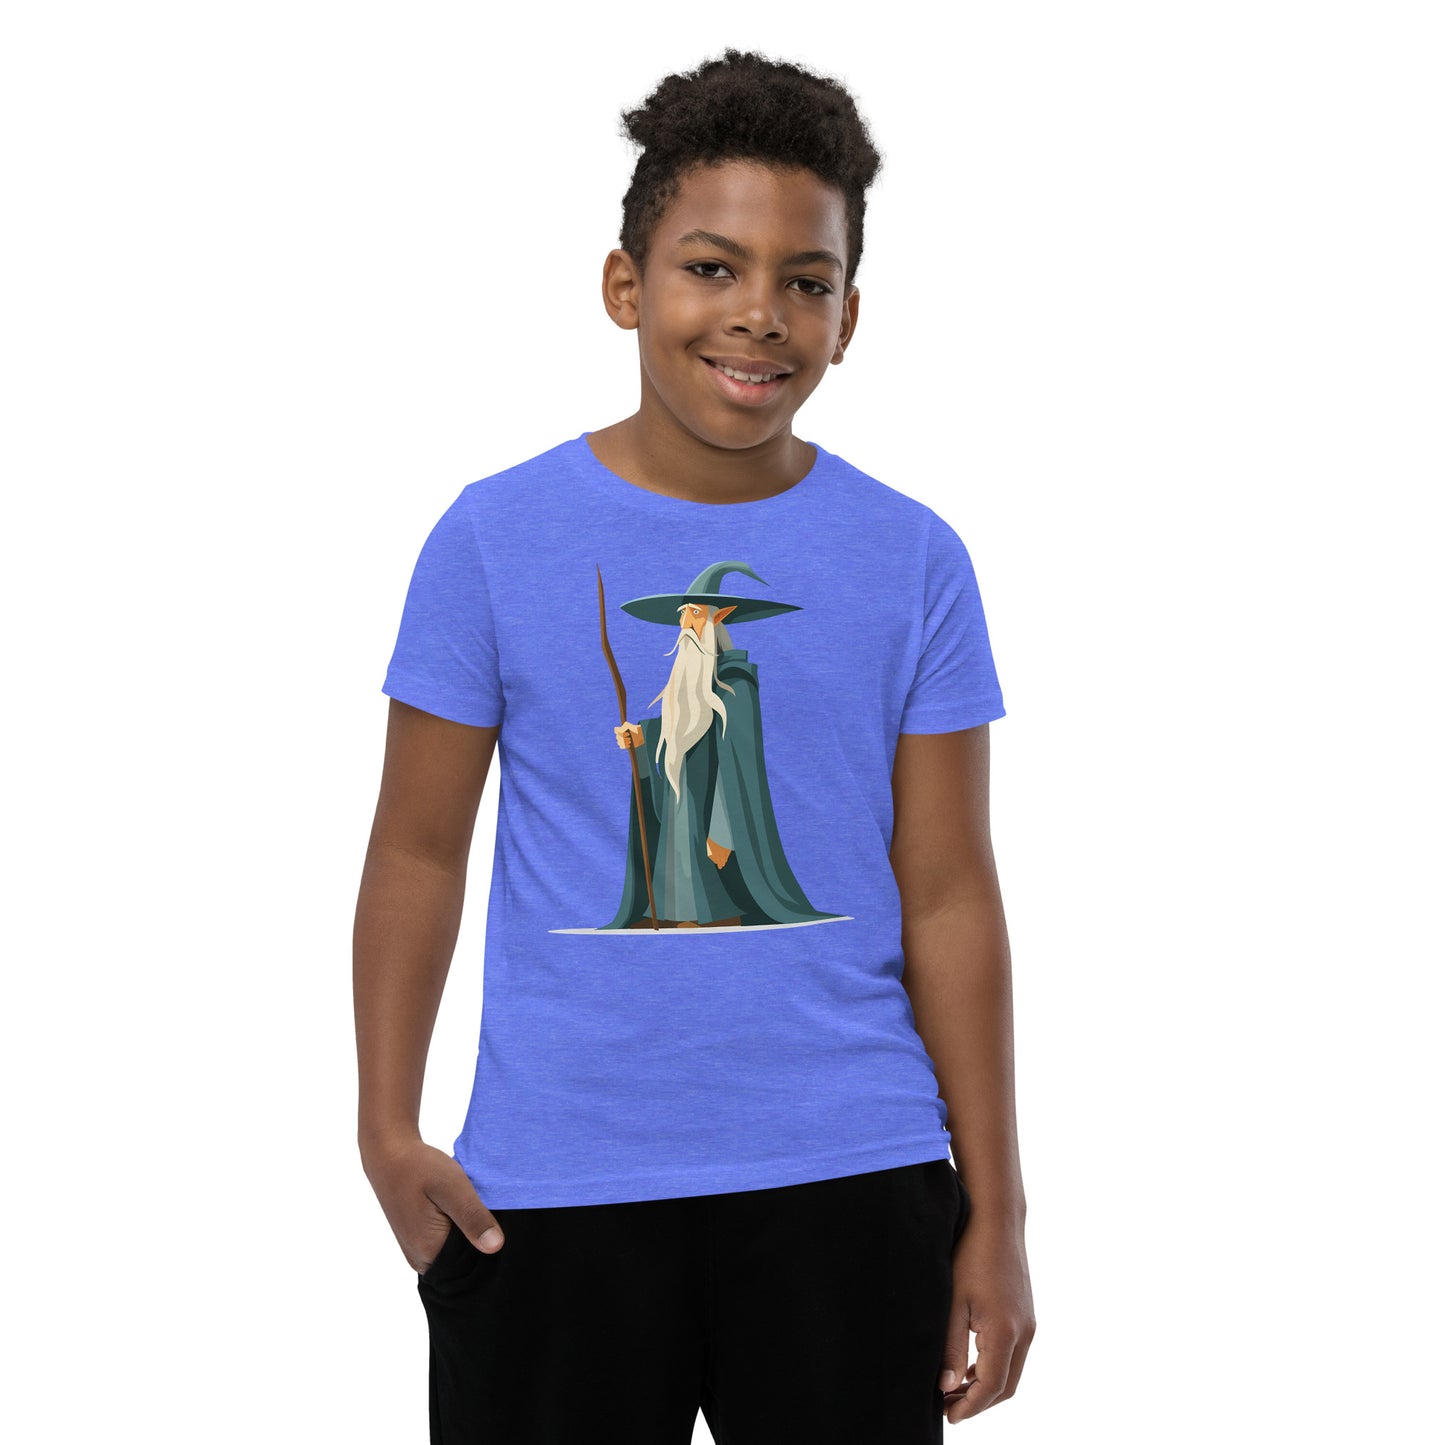 Boy with a columbia blue T-shirt with a picture of a magician